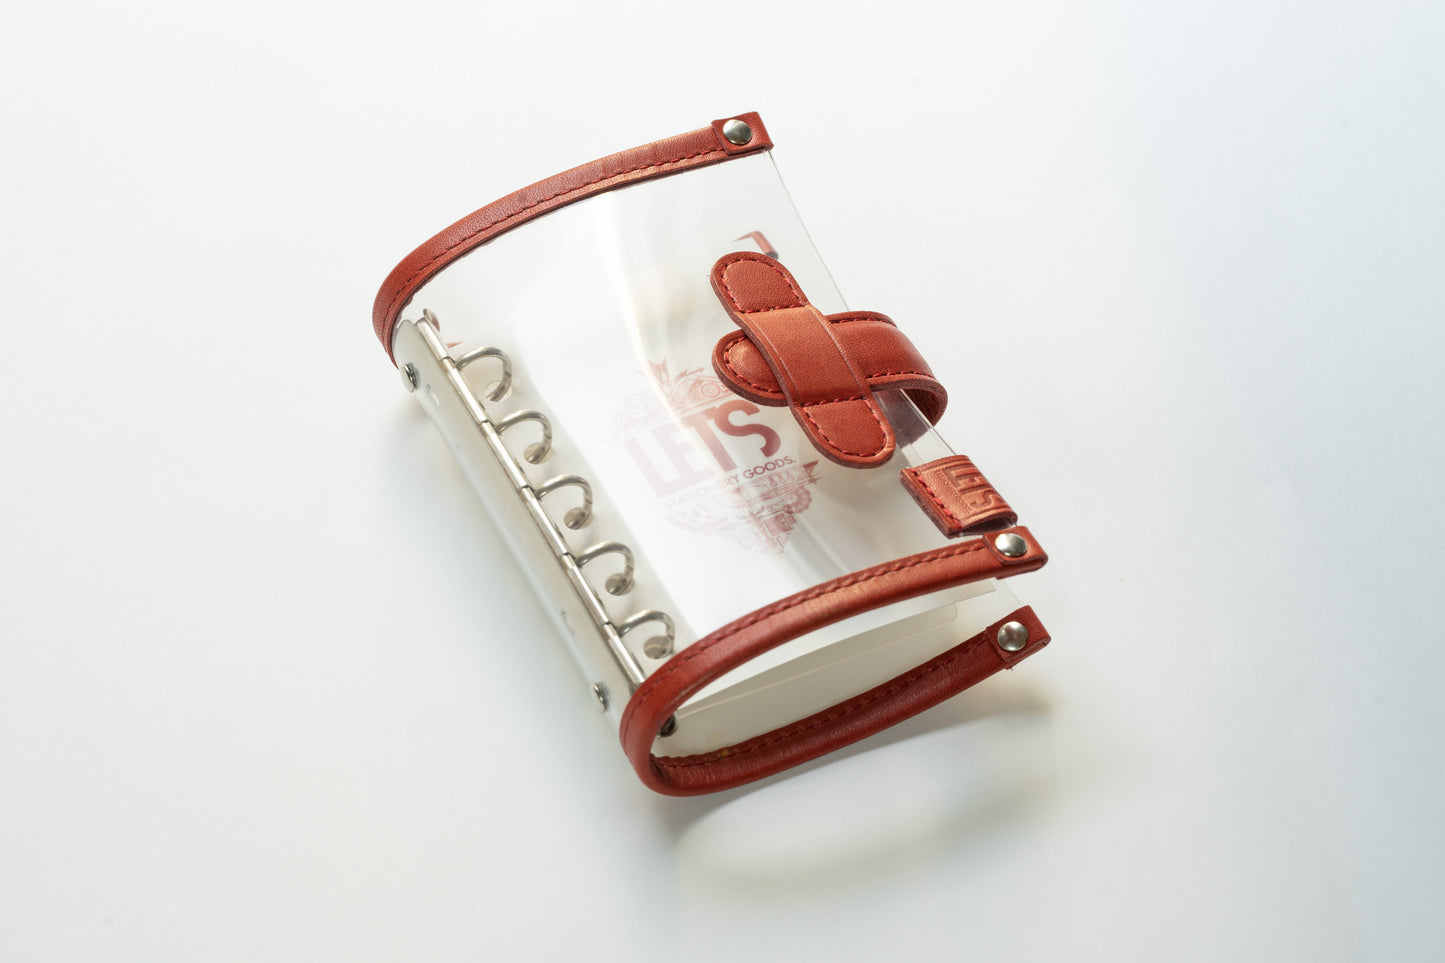 LETS Clear Leather Binder - M5 - Red